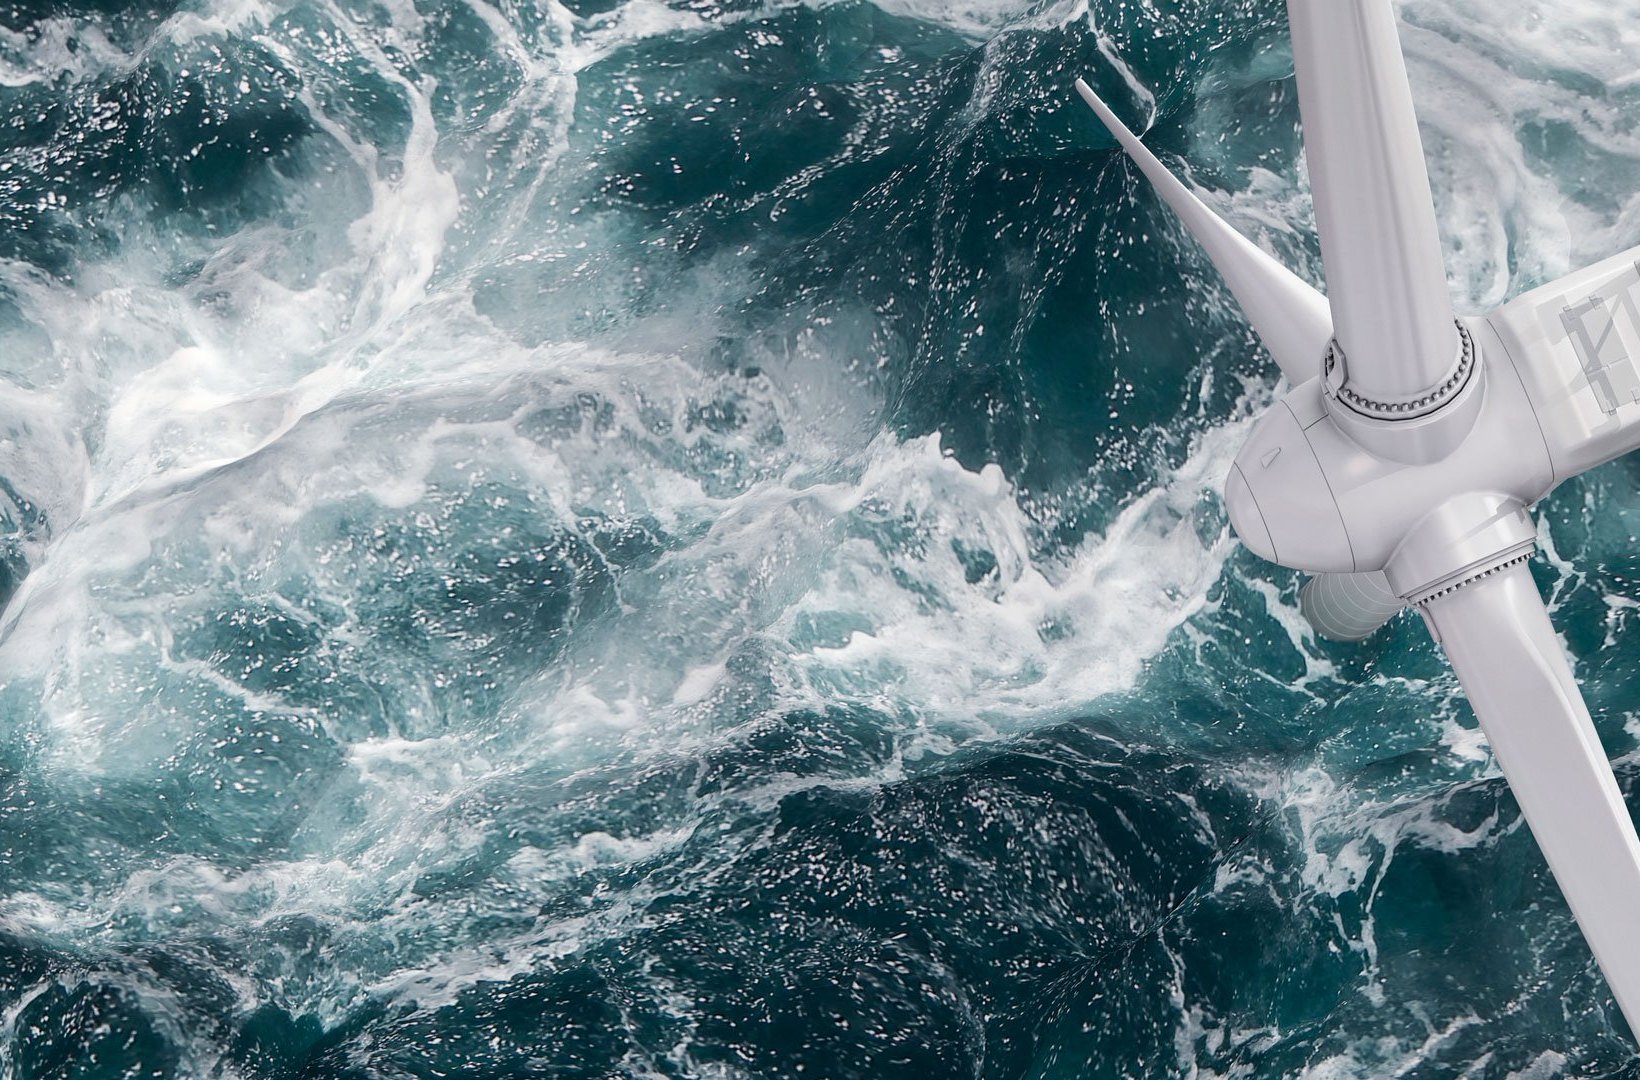 Offshore wind power plant. Photo: Getty Images